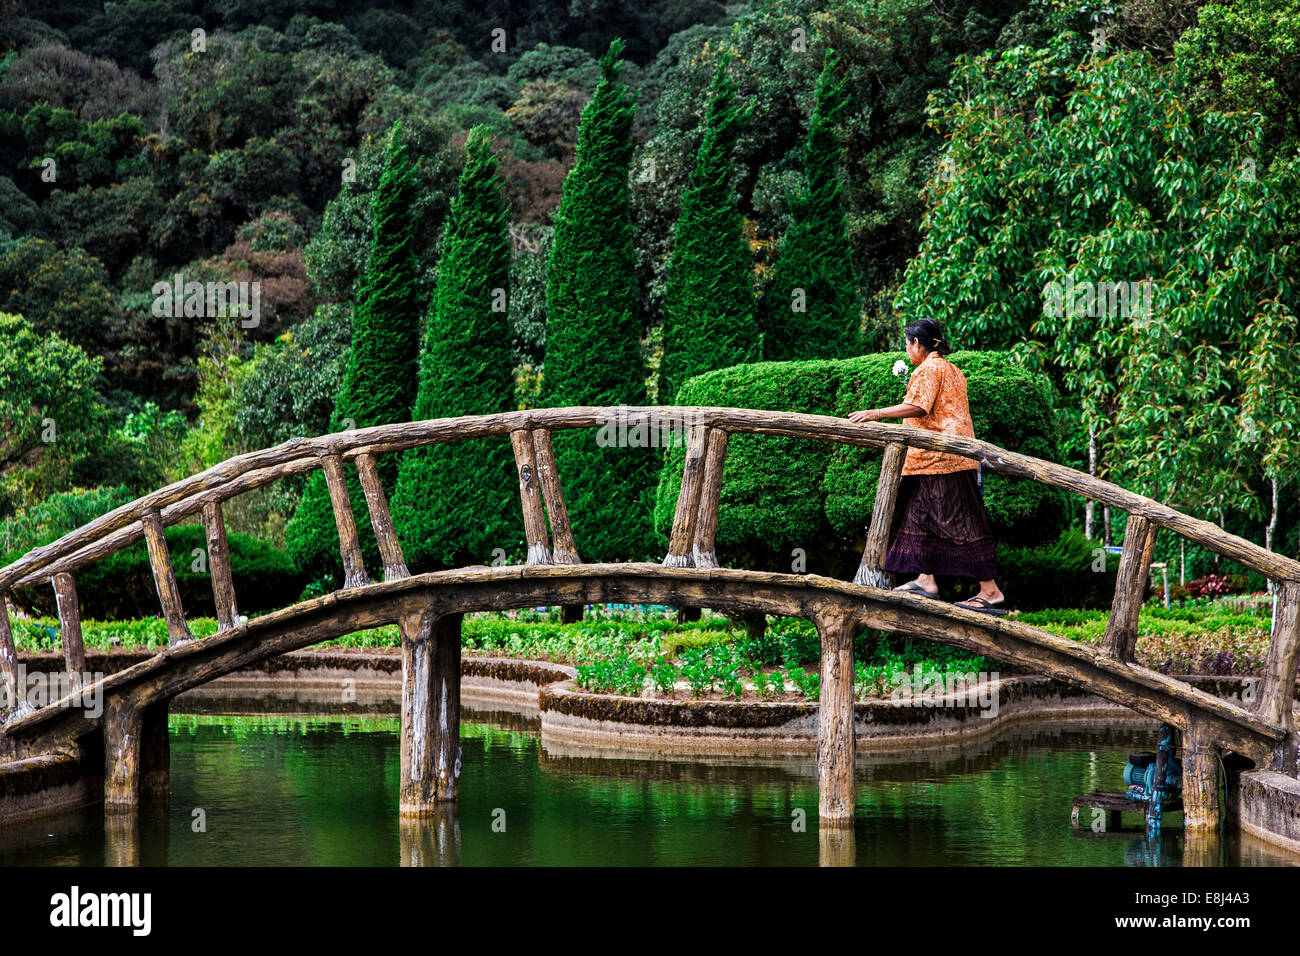 Arched bridge over a small pond on the Doi Inthanon mountain, Doi Inthanon National Park, Chiang Mai Province, Thailand Stock Photo